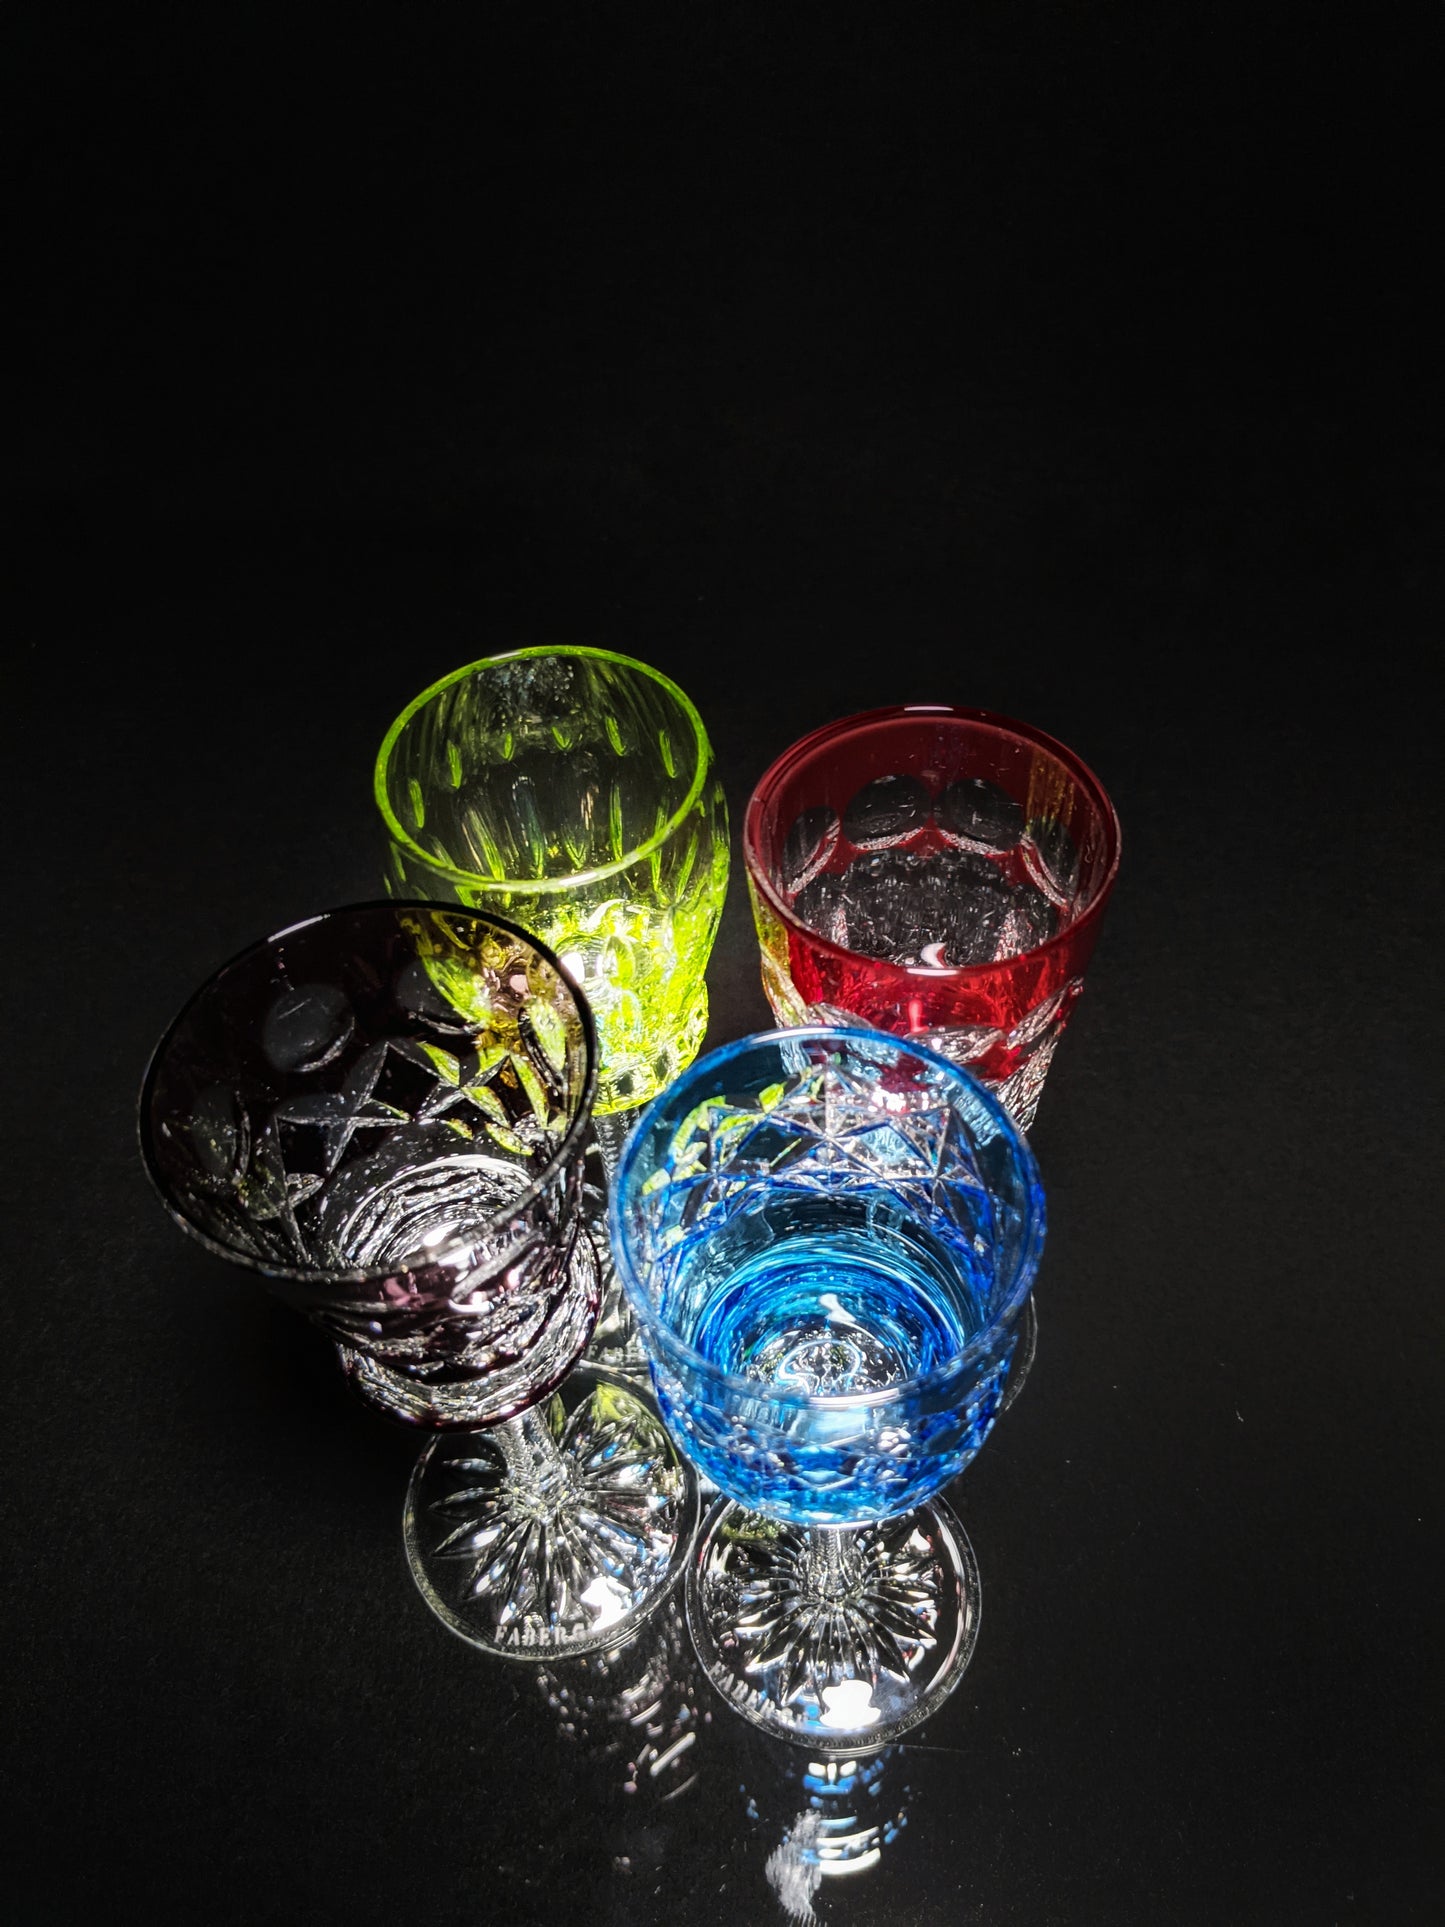 Faberge Colored Crystal  Cordial Glasses